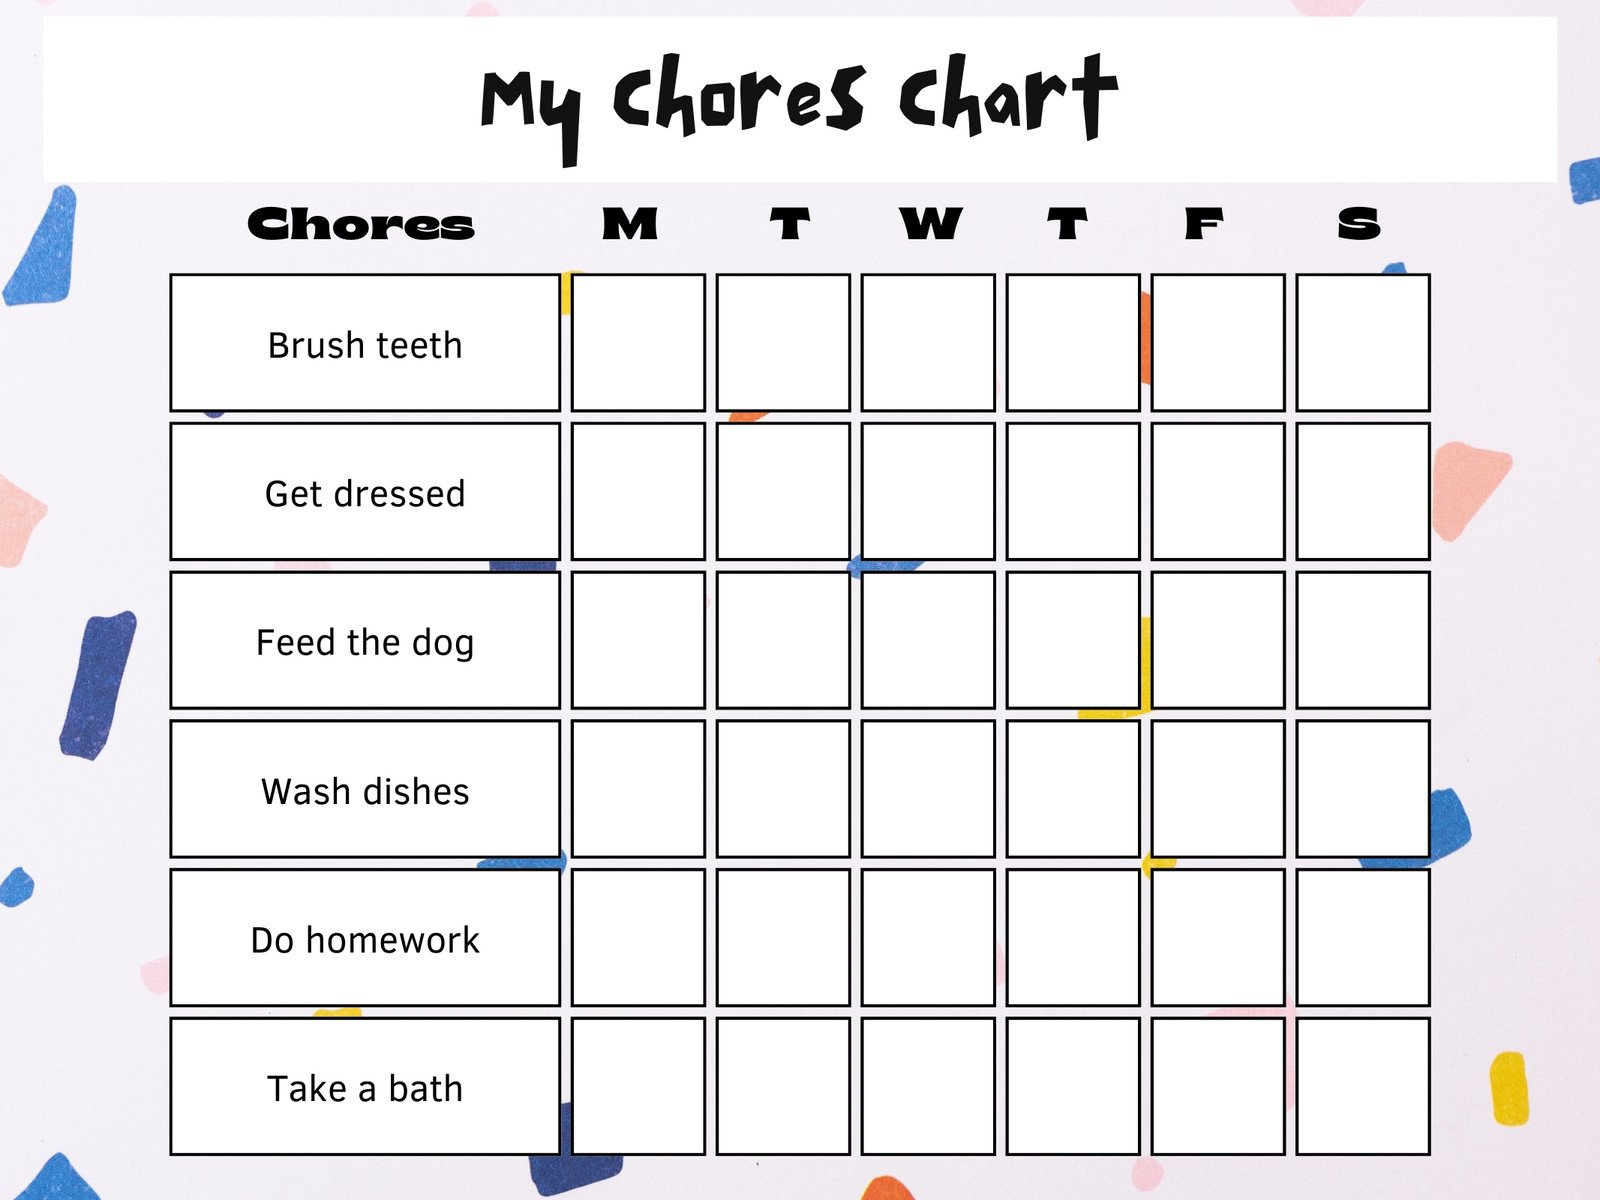 Family Chore Chart, Printable Chore Checklist, Family Checklist, Kids Chores,  Kids Chore List, Cleaning Schedule, Fillable PDF, Instant 